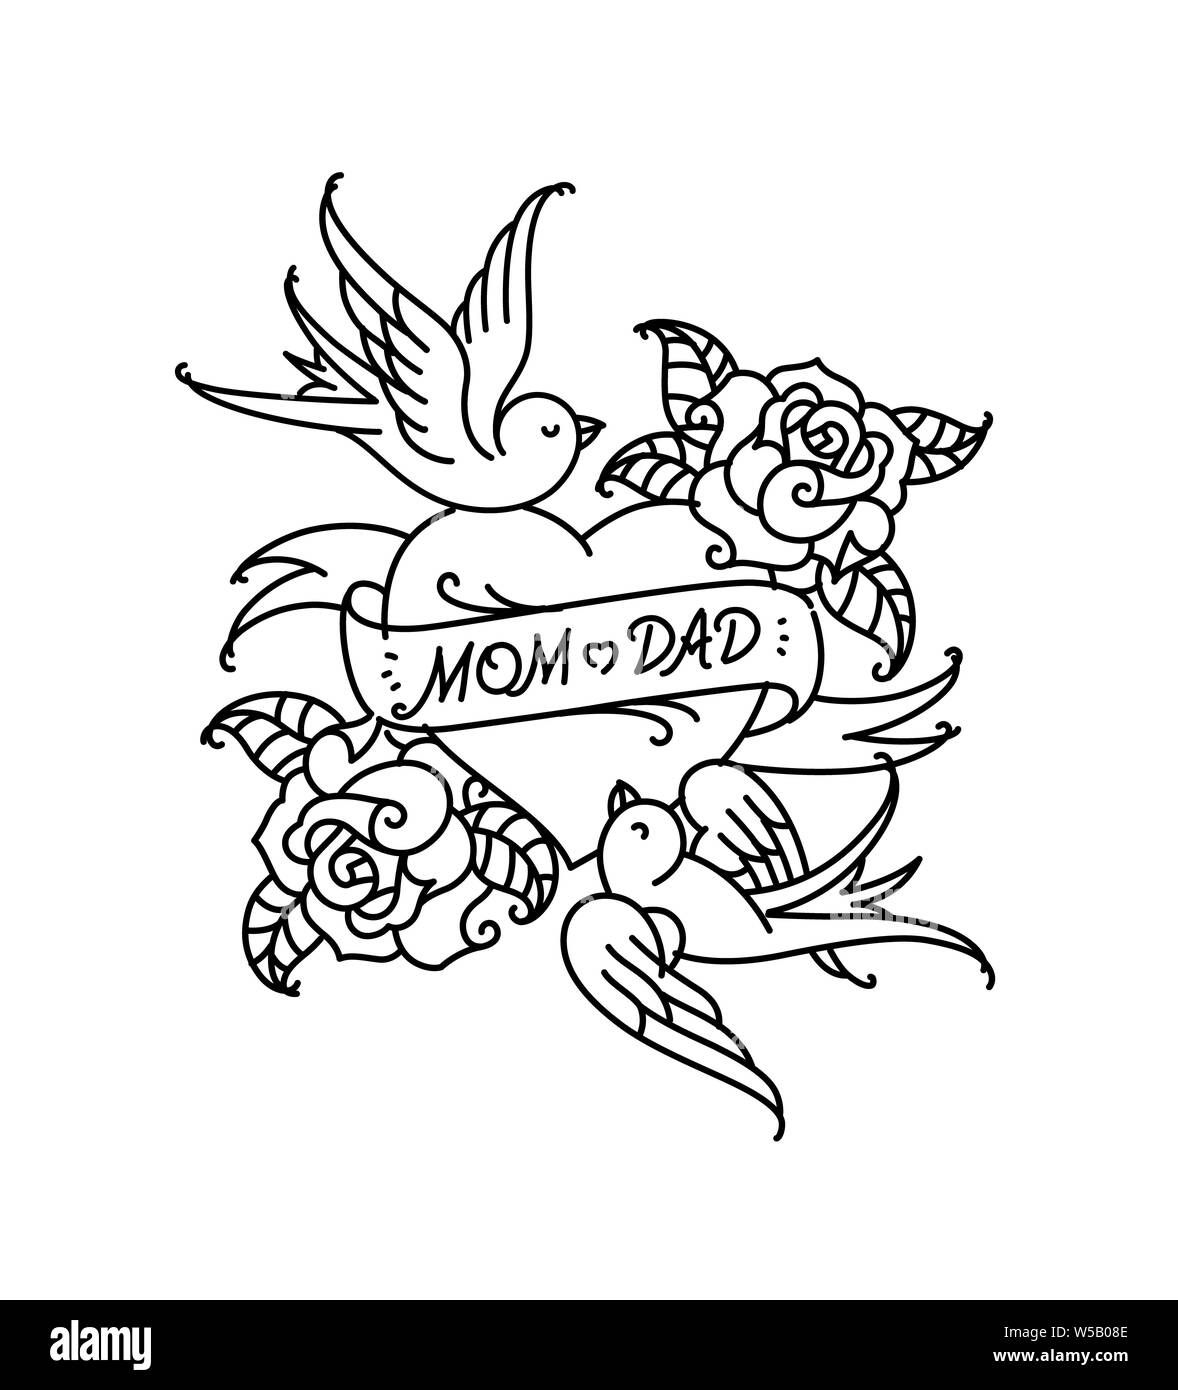 Mom tattoo Black and White Stock Photos & Images - Alamy